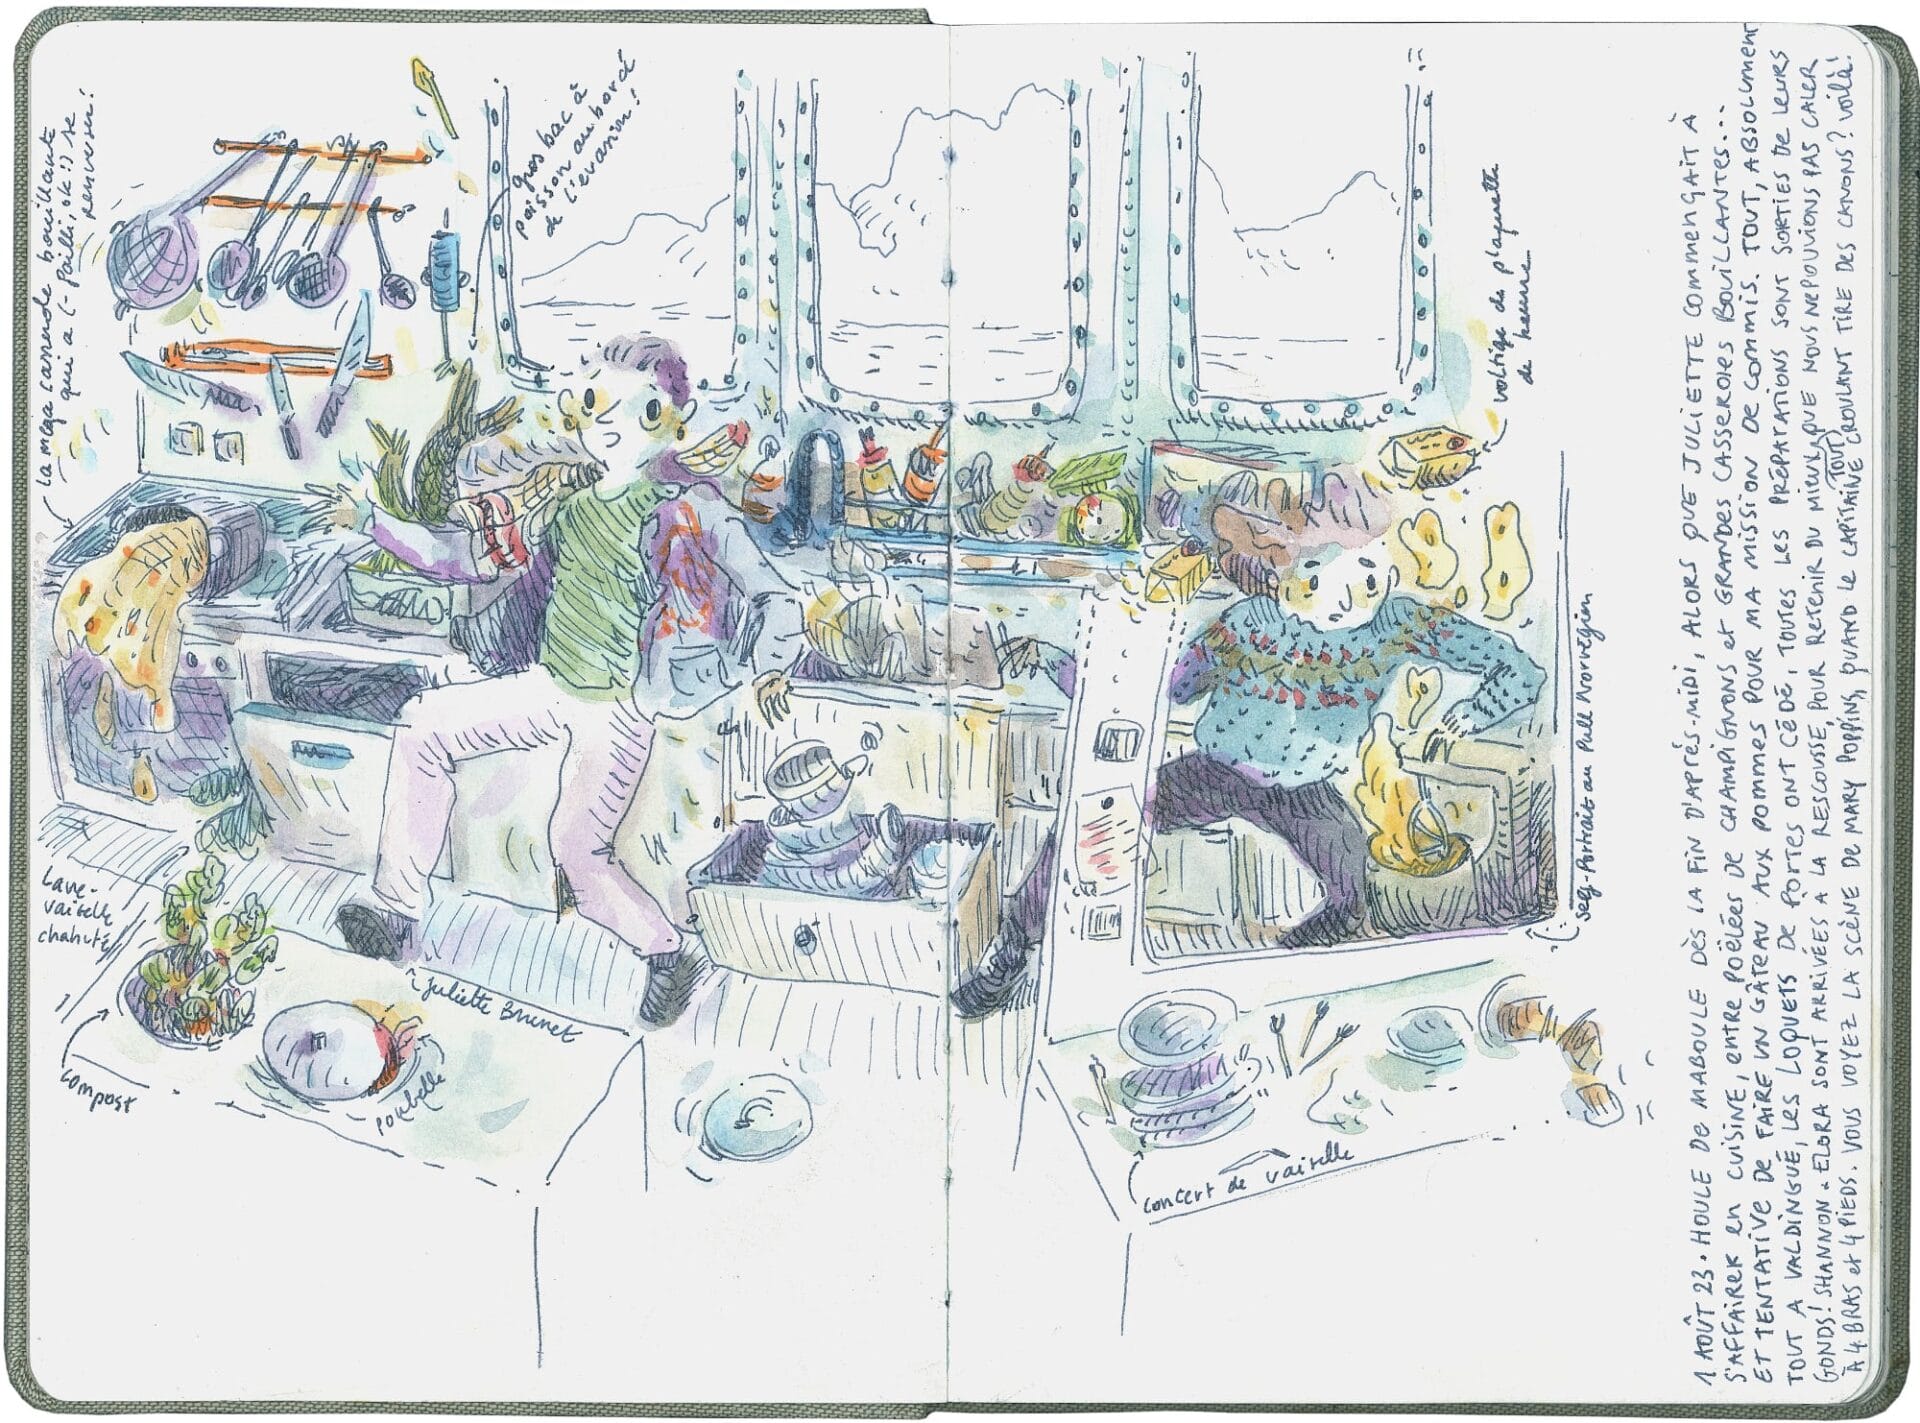 an open sketchbook with a drawing of people scrambling in a ship kitchen